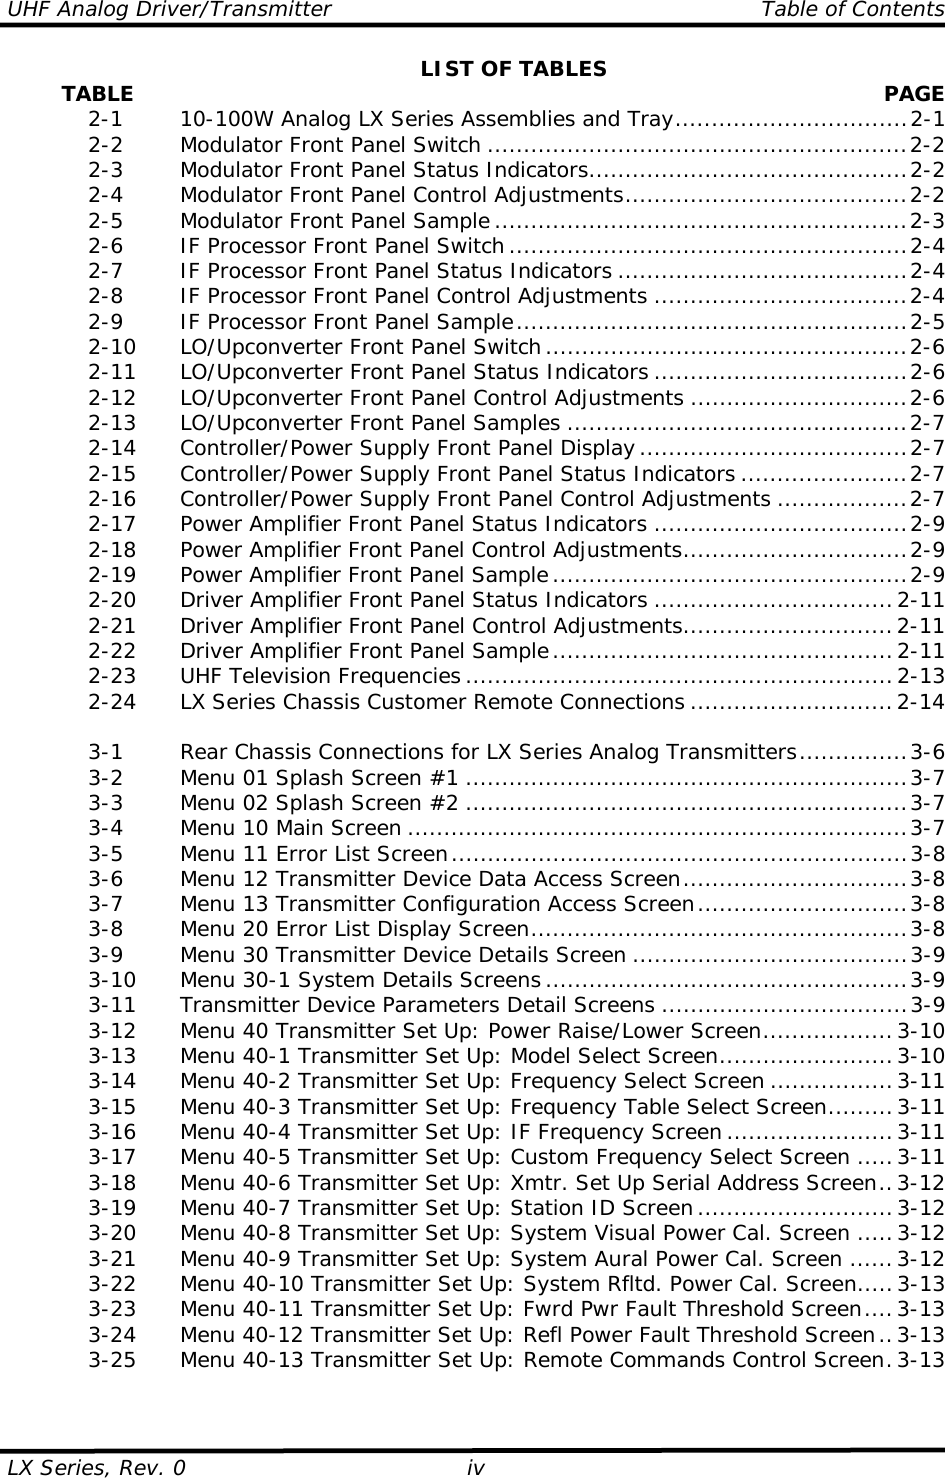 UHF Analog Driver/Transmitter    Table of Contents  LX Series, Rev. 0  iv LIST OF TABLES         TABLE   PAGE   2-1   10-100W Analog LX Series Assemblies and Tray................................2-1   2-2   Modulator Front Panel Switch ..........................................................2-2   2-3   Modulator Front Panel Status Indicators............................................2-2   2-4   Modulator Front Panel Control Adjustments.......................................2-2   2-5   Modulator Front Panel Sample .........................................................2-3   2-6   IF Processor Front Panel Switch .......................................................2-4   2-7   IF Processor Front Panel Status Indicators ........................................2-4   2-8    IF Processor Front Panel Control Adjustments ...................................2-4   2-9   IF Processor Front Panel Sample......................................................2-5   2-10  LO/Upconverter Front Panel Switch ..................................................2-6   2-11  LO/Upconverter Front Panel Status Indicators ...................................2-6   2-12  LO/Upconverter Front Panel Control Adjustments ..............................2-6   2-13  LO/Upconverter Front Panel Samples ...............................................2-7   2-14  Controller/Power Supply Front Panel Display .....................................2-7   2-15  Controller/Power Supply Front Panel Status Indicators .......................2-7   2-16  Controller/Power Supply Front Panel Control Adjustments ..................2-7   2-17  Power Amplifier Front Panel Status Indicators ...................................2-9   2-18  Power Amplifier Front Panel Control Adjustments...............................2-9   2-19  Power Amplifier Front Panel Sample.................................................2-9   2-20  Driver Amplifier Front Panel Status Indicators ................................. 2-11   2-21  Driver Amplifier Front Panel Control Adjustments.............................2-11   2-22  Driver Amplifier Front Panel Sample...............................................2-11  2-23 UHF Television Frequencies ...........................................................2-13  2-24  LX Series Chassis Customer Remote Connections ............................ 2-14    3-1   Rear Chassis Connections for LX Series Analog Transmitters...............3-6   3-2   Menu 01 Splash Screen #1 .............................................................3-7   3-3   Menu 02 Splash Screen #2 .............................................................3-7   3-4   Menu 10 Main Screen .....................................................................3-7   3-5   Menu 11 Error List Screen...............................................................3-8   3-6   Menu 12 Transmitter Device Data Access Screen...............................3-8   3-7   Menu 13 Transmitter Configuration Access Screen.............................3-8   3-8   Menu 20 Error List Display Screen....................................................3-8   3-9   Menu 30 Transmitter Device Details Screen ......................................3-9   3-10  Menu 30-1 System Details Screens ..................................................3-9   3-11  Transmitter Device Parameters Detail Screens ..................................3-9   3-12  Menu 40 Transmitter Set Up: Power Raise/Lower Screen..................3-10   3-13  Menu 40-1 Transmitter Set Up: Model Select Screen........................3-10   3-14  Menu 40-2 Transmitter Set Up: Frequency Select Screen .................3-11   3-15  Menu 40-3 Transmitter Set Up: Frequency Table Select Screen......... 3-11   3-16  Menu 40-4 Transmitter Set Up: IF Frequency Screen .......................3-11   3-17  Menu 40-5 Transmitter Set Up: Custom Frequency Select Screen ..... 3-11   3-18  Menu 40-6 Transmitter Set Up: Xmtr. Set Up Serial Address Screen..3-12   3-19  Menu 40-7 Transmitter Set Up: Station ID Screen ...........................3-12   3-20  Menu 40-8 Transmitter Set Up: System Visual Power Cal. Screen .....3-12   3-21  Menu 40-9 Transmitter Set Up: System Aural Power Cal. Screen ......3-12   3-22  Menu 40-10 Transmitter Set Up: System Rfltd. Power Cal. Screen.....3-13   3-23  Menu 40-11 Transmitter Set Up: Fwrd Pwr Fault Threshold Screen.... 3-13   3-24  Menu 40-12 Transmitter Set Up: Refl Power Fault Threshold Screen..3-13   3-25  Menu 40-13 Transmitter Set Up: Remote Commands Control Screen.3-13  